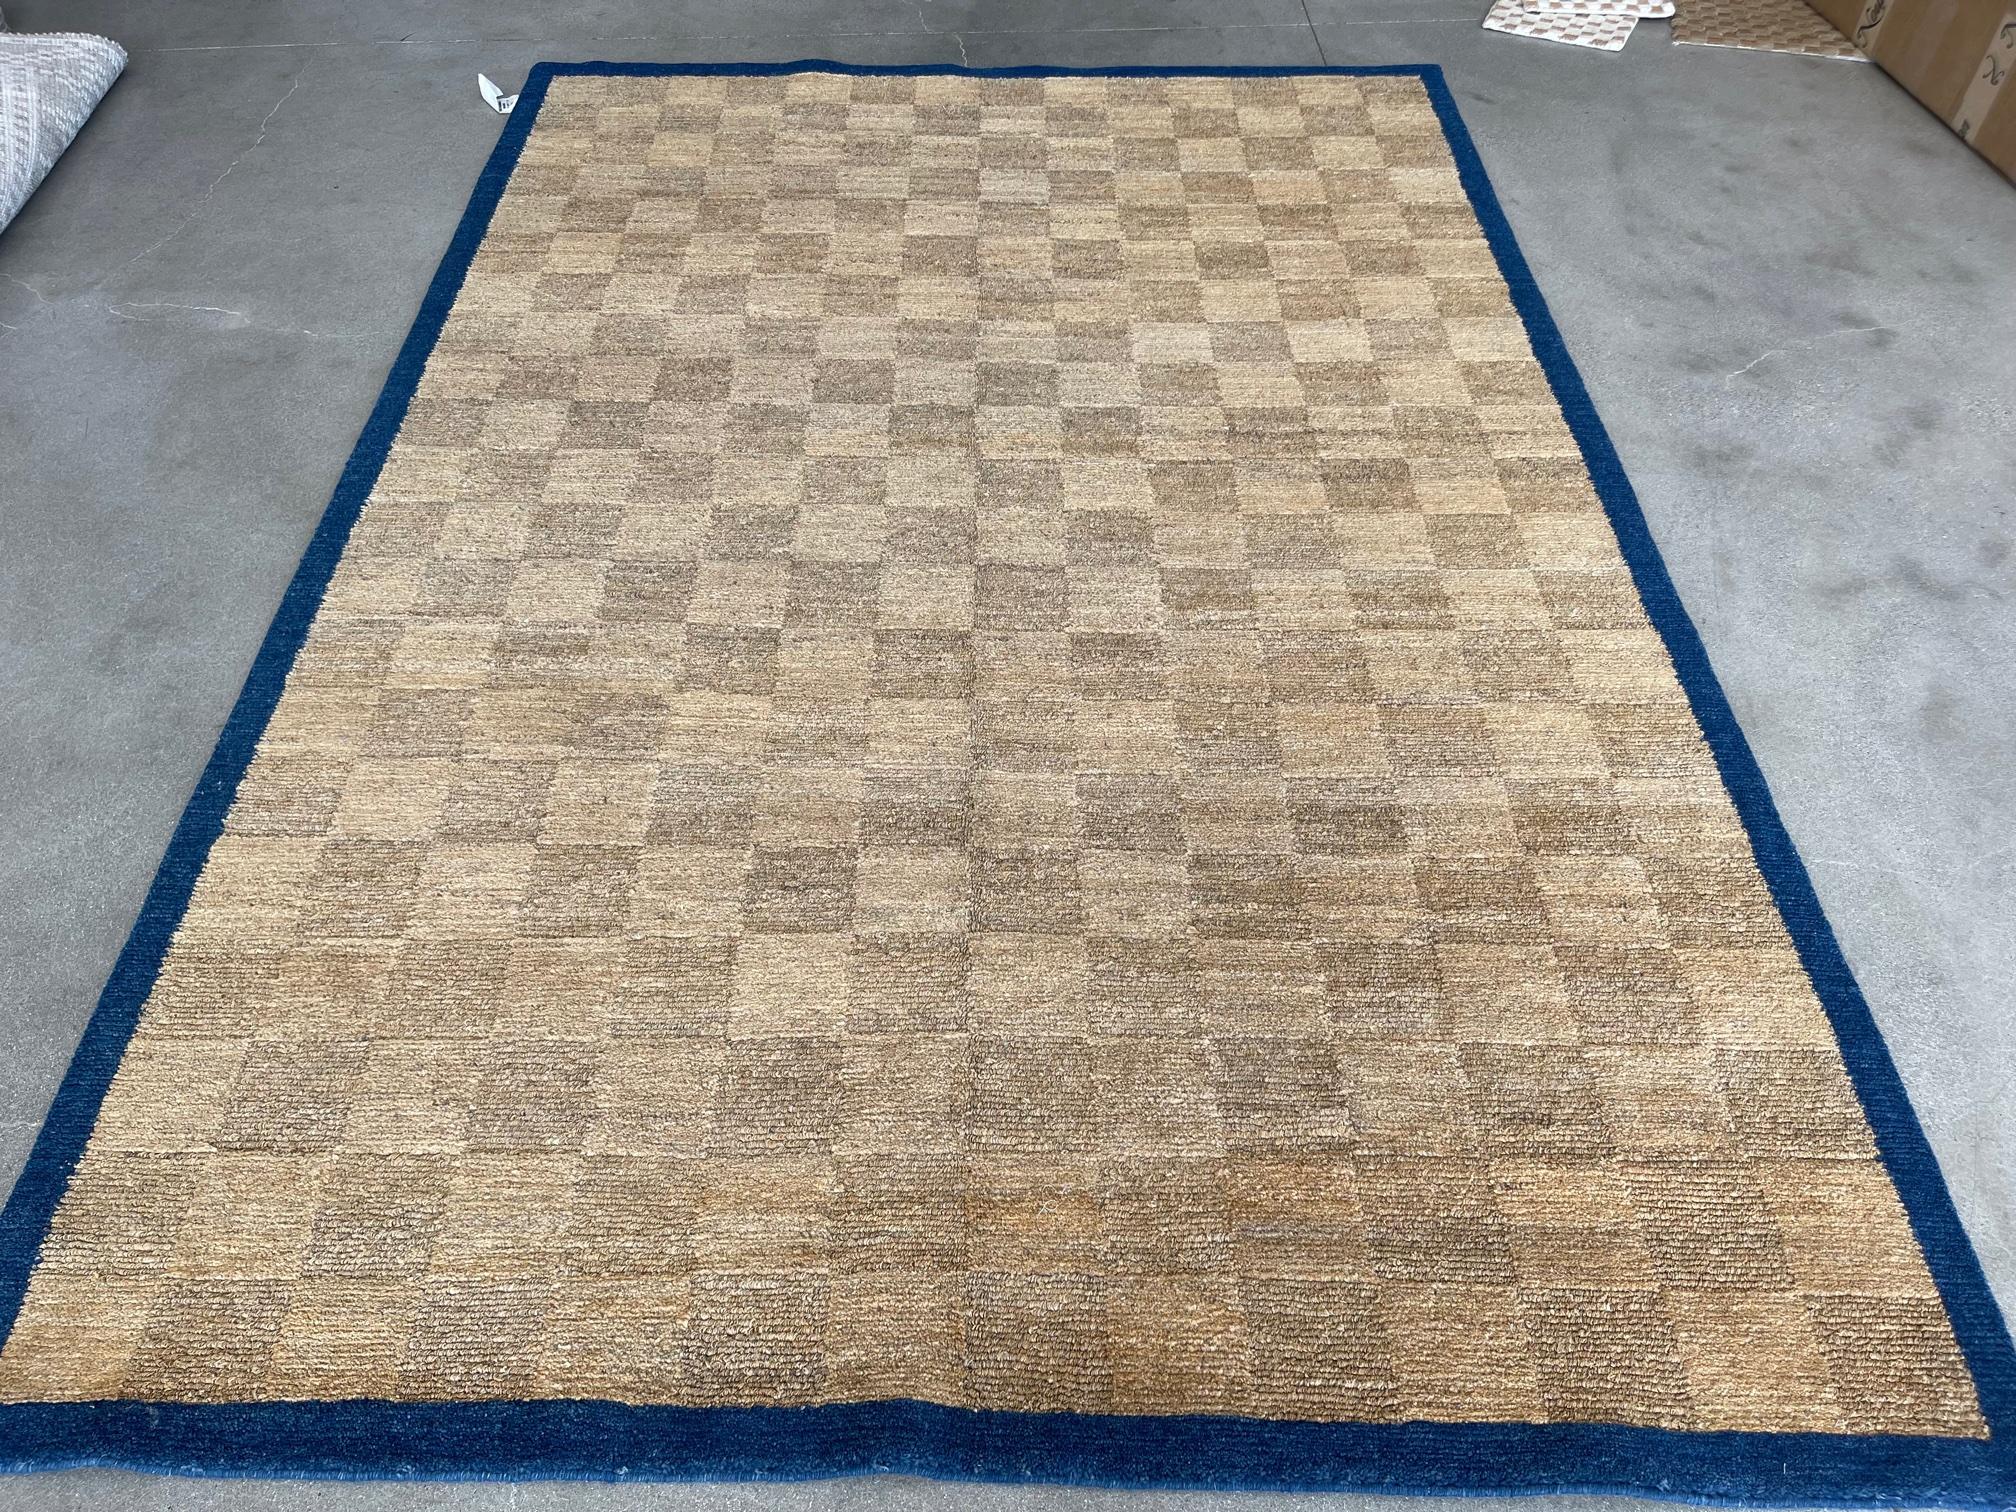 Tone on tone checkered rug with navy border

Colors: Gold, cream, ivory, beige, navy blue.